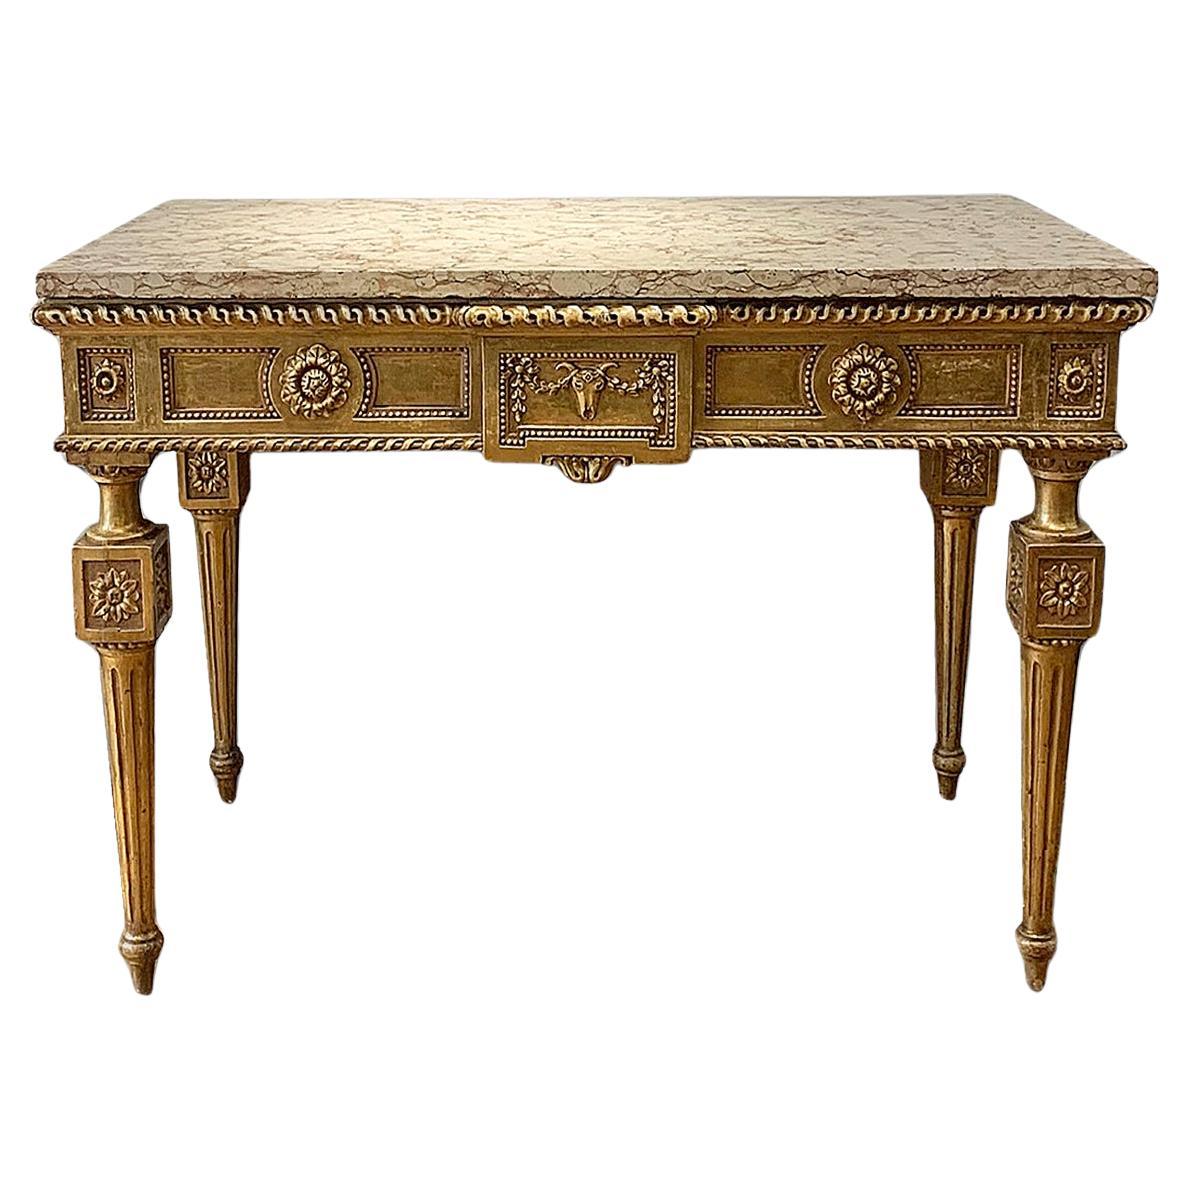 END OF THE 18th CENTURY GOLDEN CONSOLE 